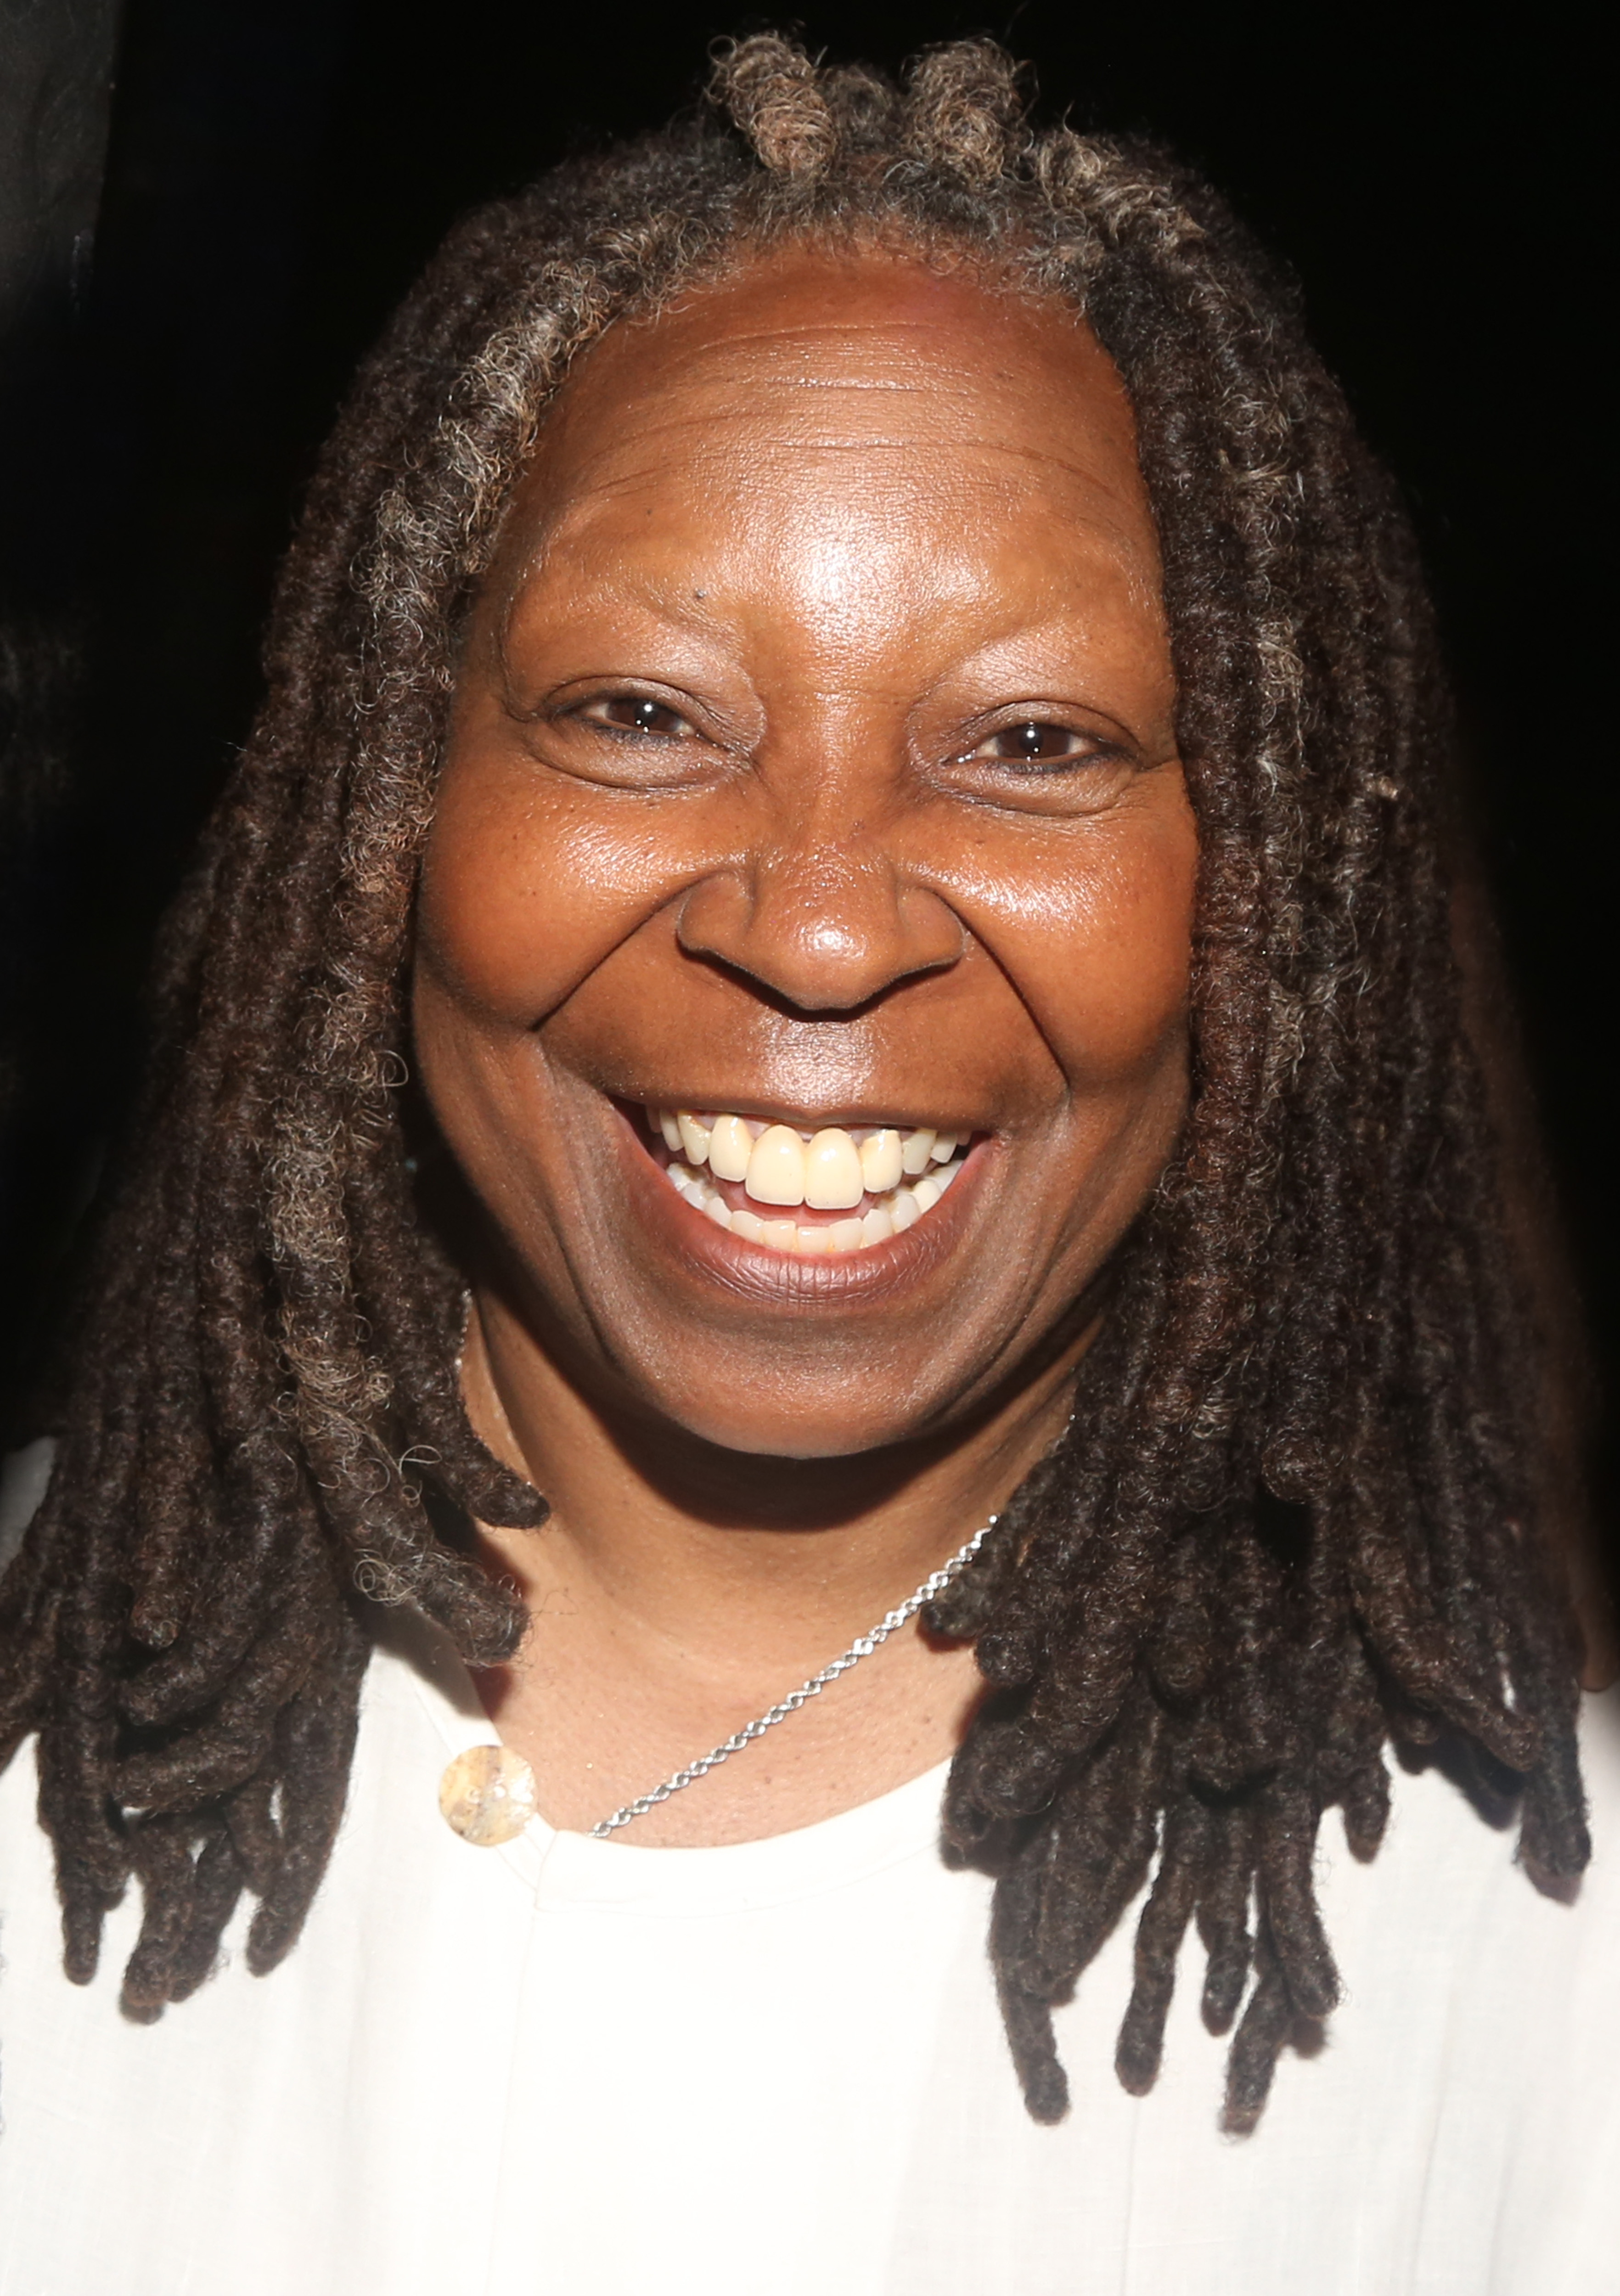 Whoopi Goldberg backstage at a play based on the movie "Life of Pi" in New York City, 2023 | Source: Getty Images